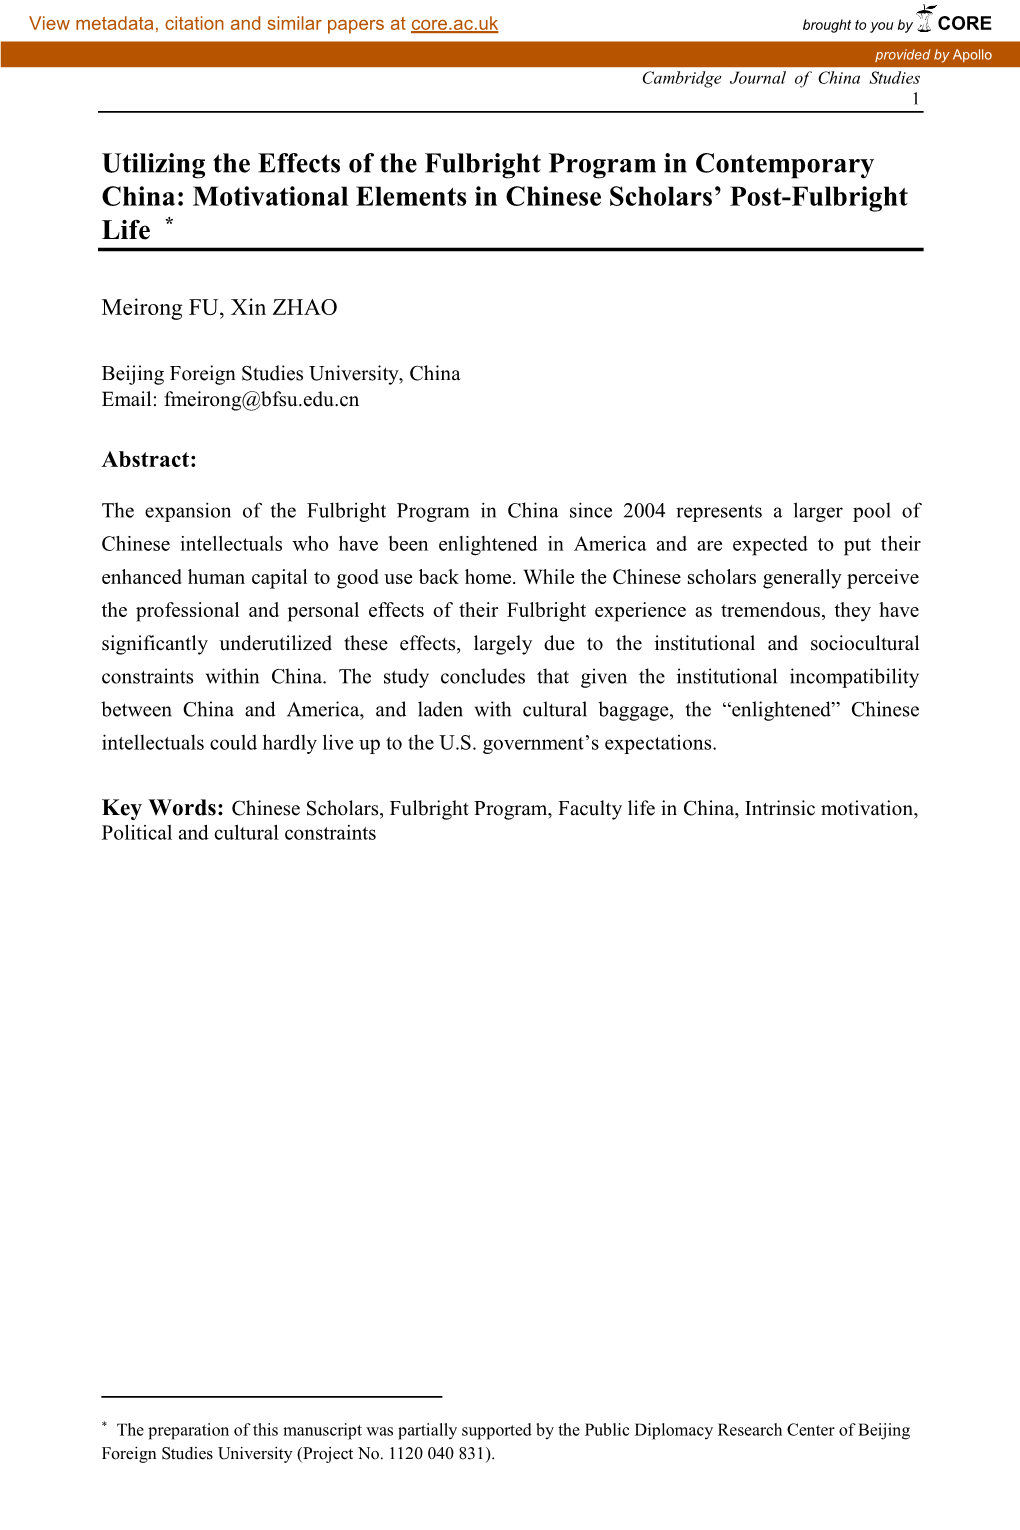 Impact of the Fulbright Program on Chinese Academics' Competence